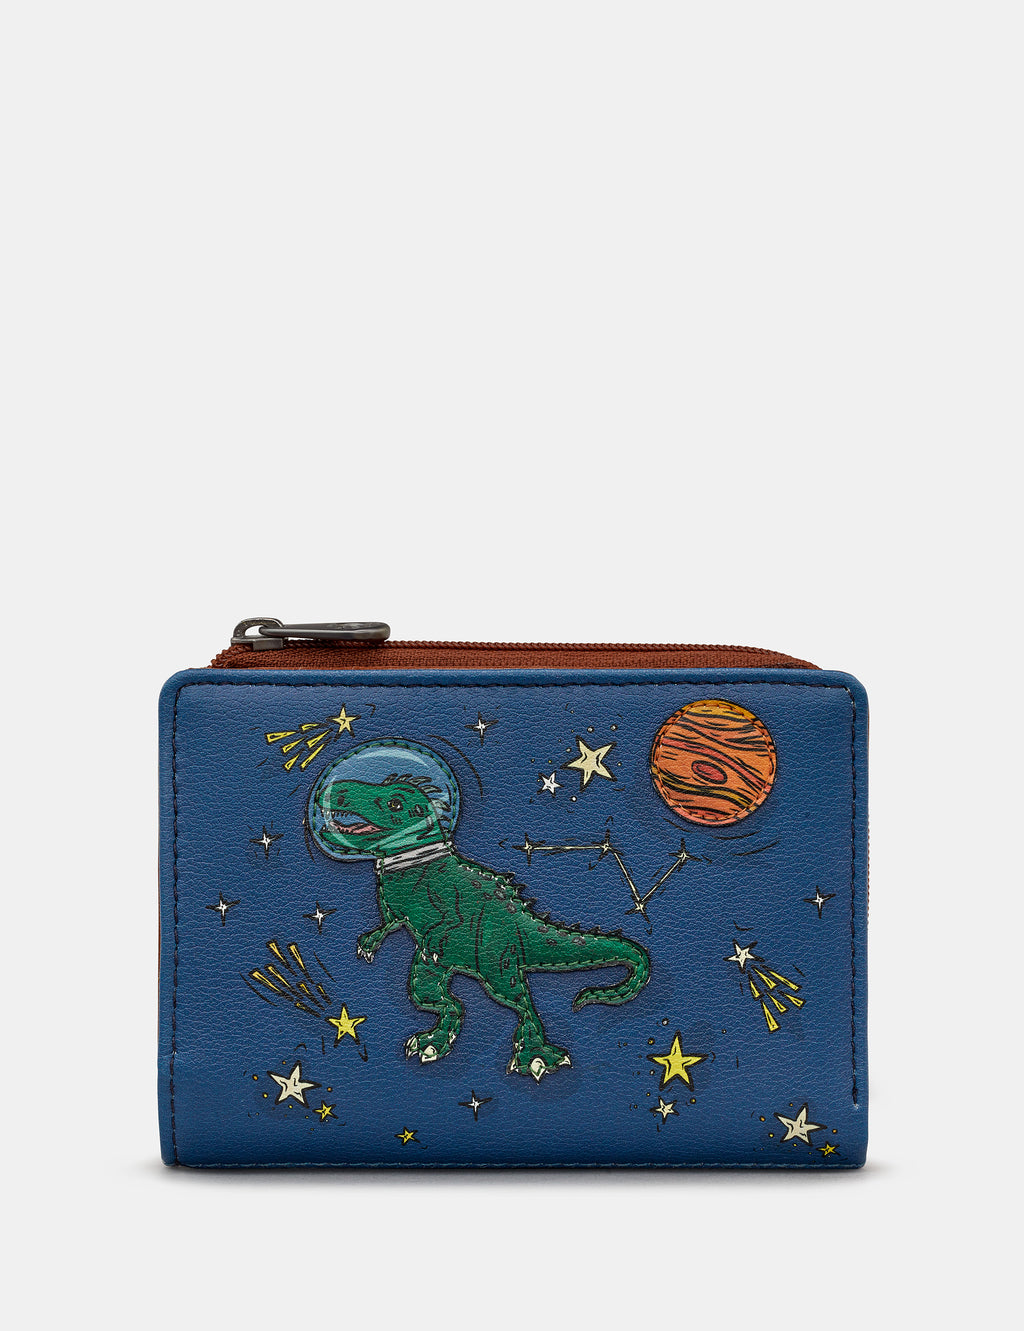 Lost in Space Leather Flap Over Purse